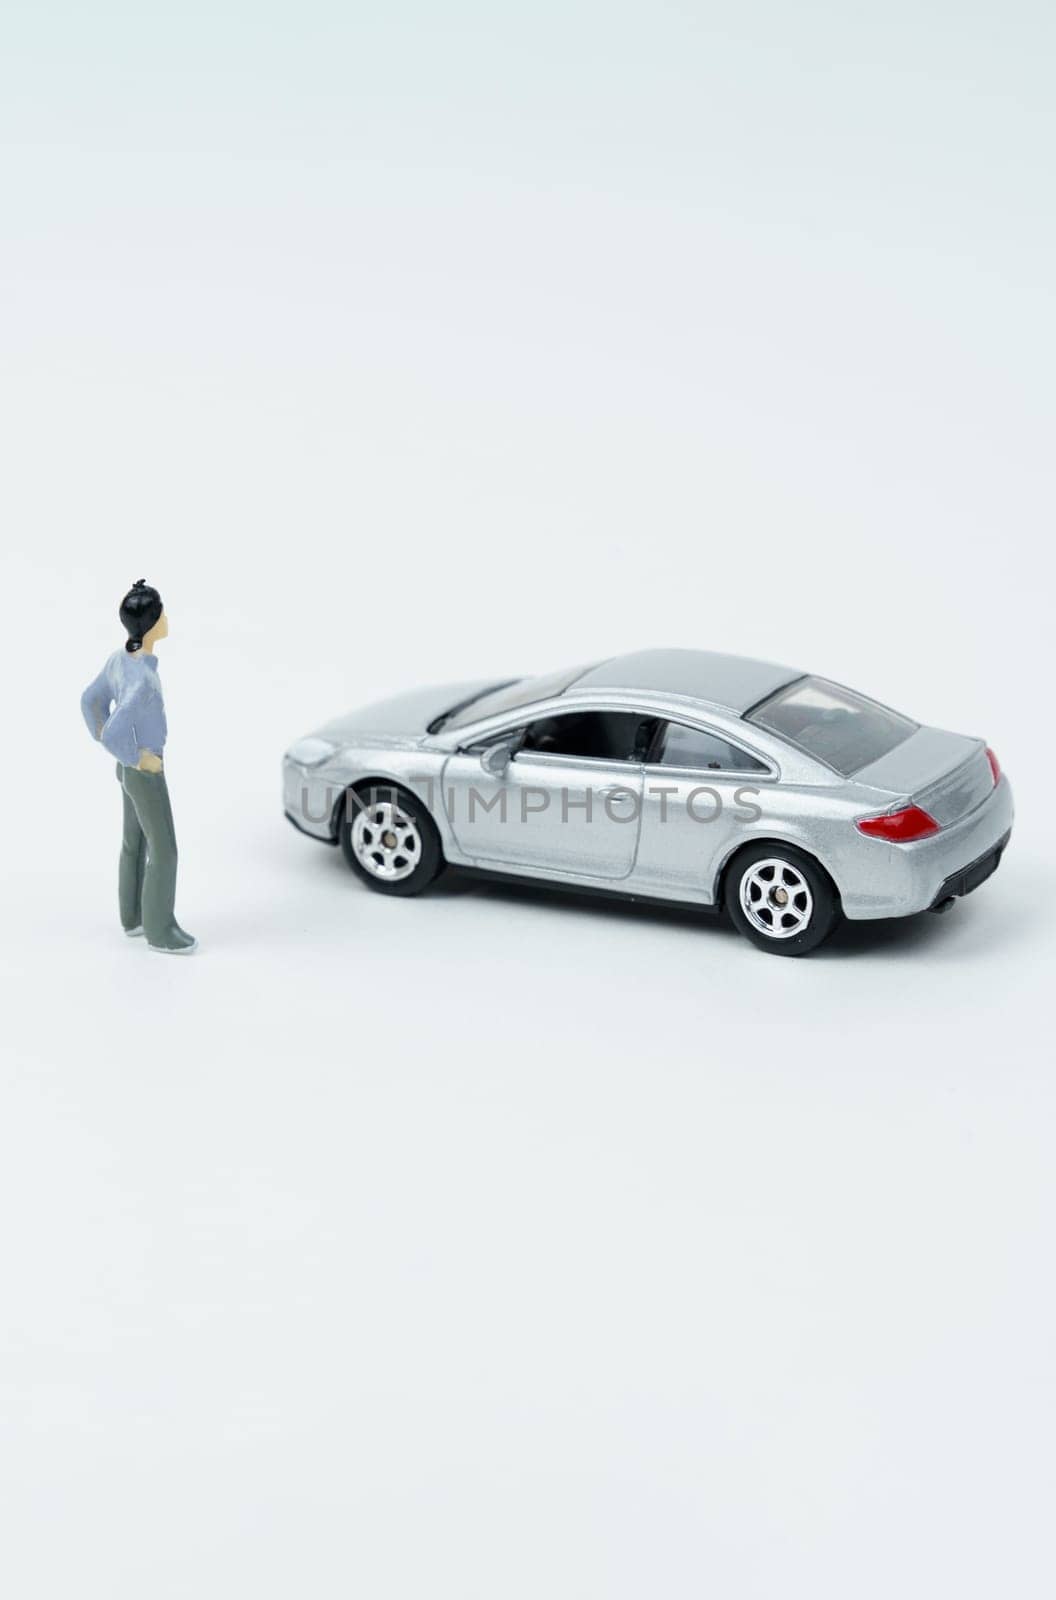 Industry and technology concept. On a white surface is a car and a miniature figurine of a man looking at the car.